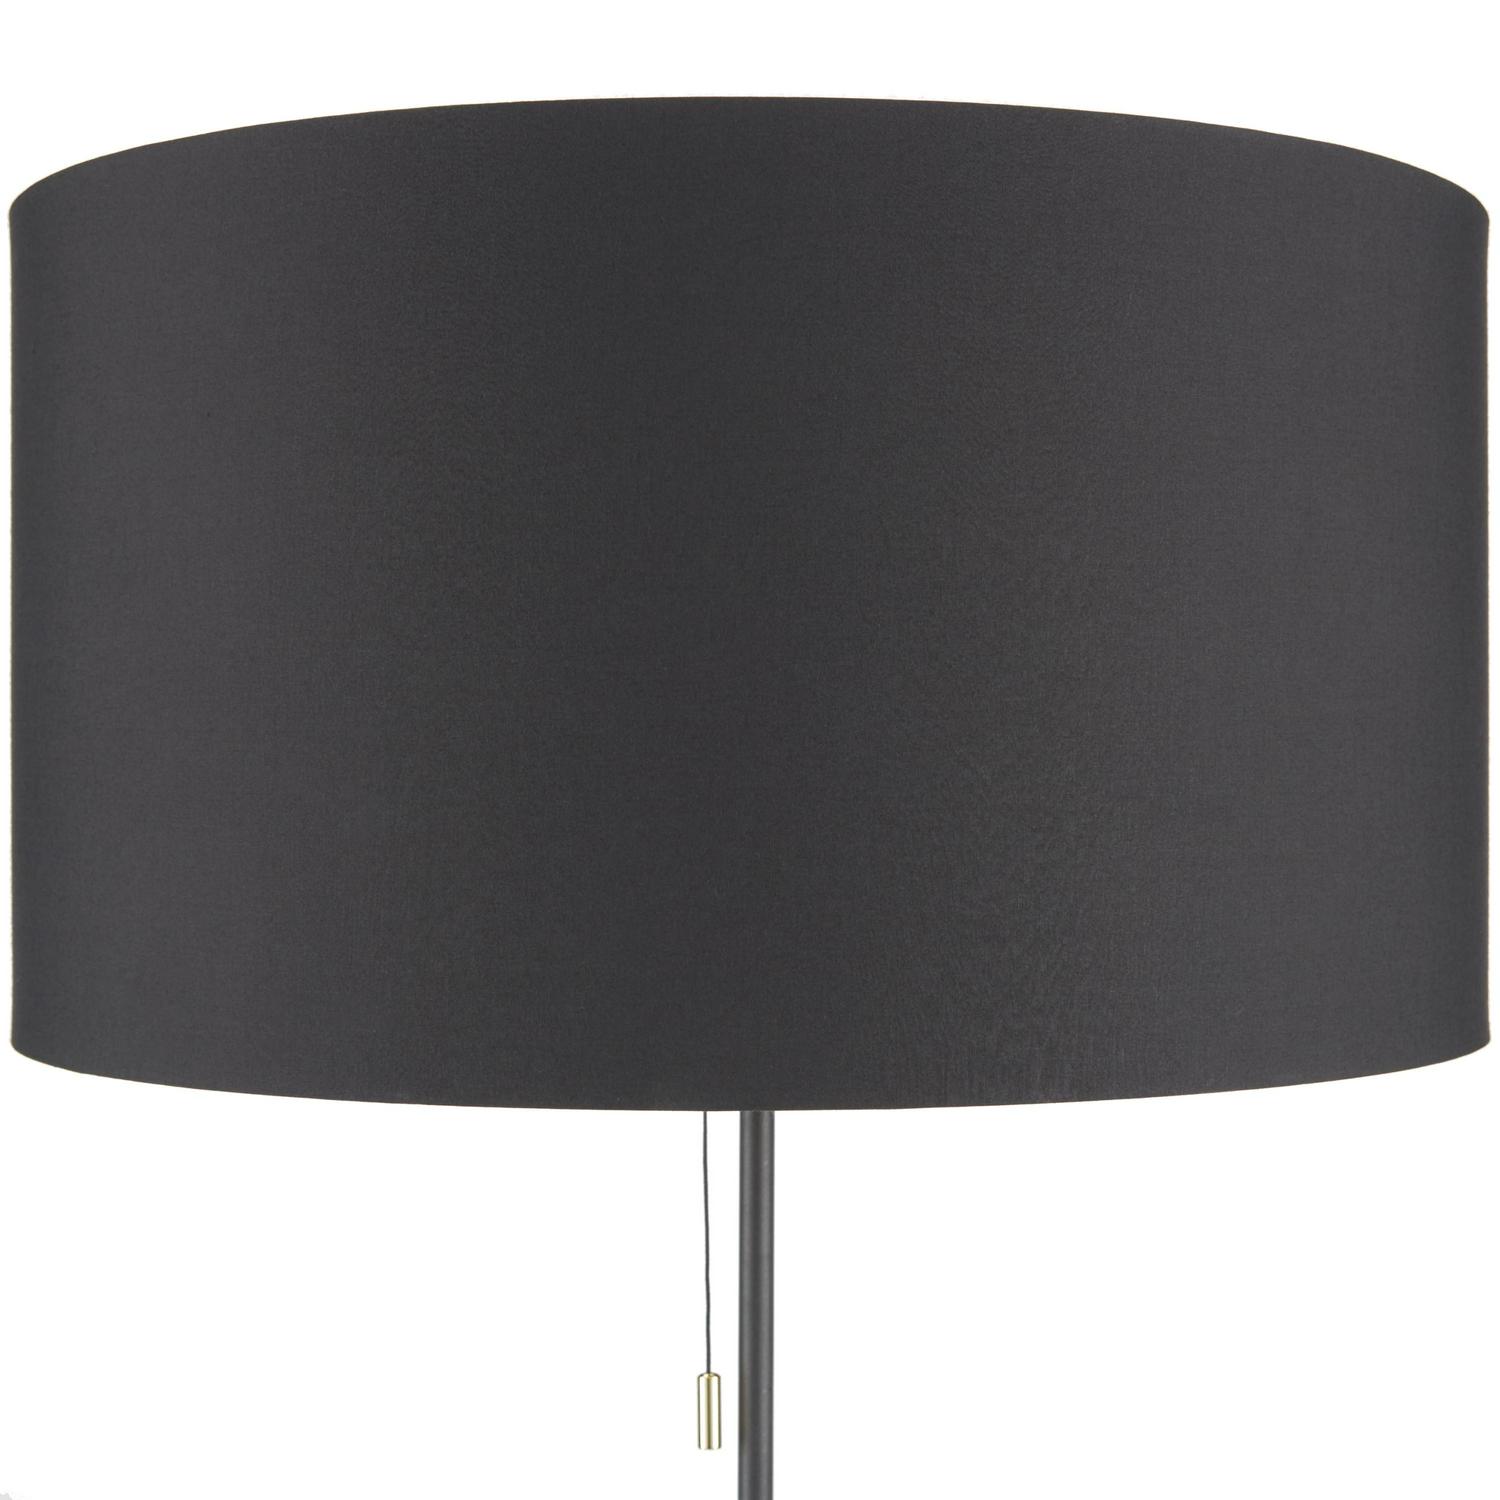 Nourison 69 Black Floor Lamp， Contemporary， Transitional， Bedroom， Living Room， Office， with Adjustable Height